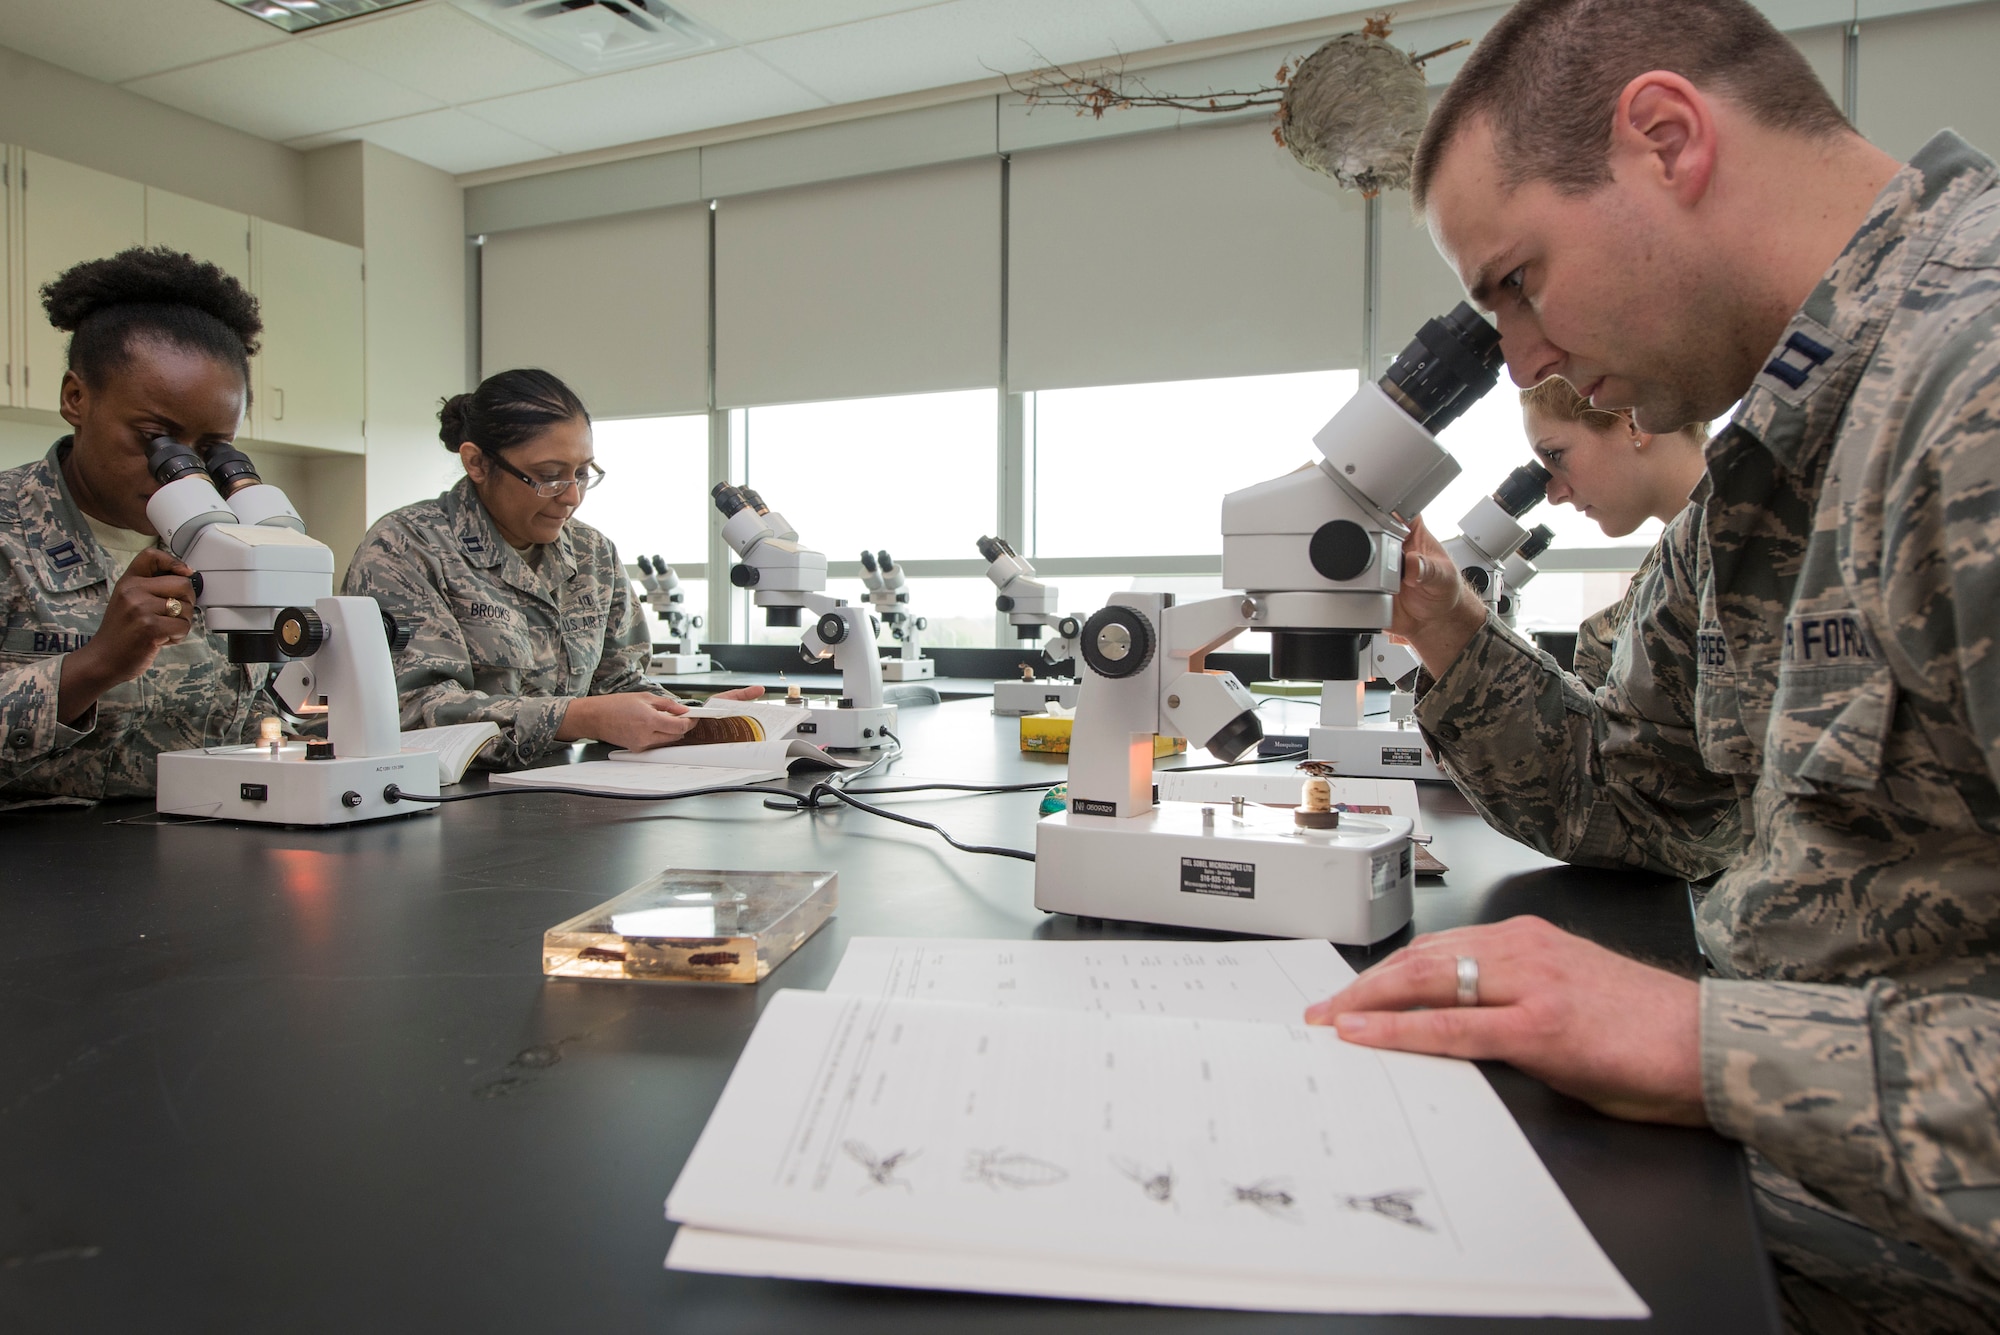 U. S. Air Force School of Aerospace Medicine Public Health Education Division students Capt. Ryan Joerres (right, front), 1st Lt. Lara Esin (right, back) and Capt. Michele Balihe (left, front) and faculty member Capt. Caroline Brooks (left, back), view medically significant insects inside the entomology education laboratory at the Public Health and Preventive Medicine Department, U.S. Air Force School of Aerospace Medicine, Wright-Patterson Air Force Base, Ohio, April 21, 2017. Air Force Public Health students study vectors of disease to better understand how some transmit pathogens, such as Zika, Chikungunya, Dengue and West Nile viruses.
(U.S. Air Force photo/Michelle Gigante)
